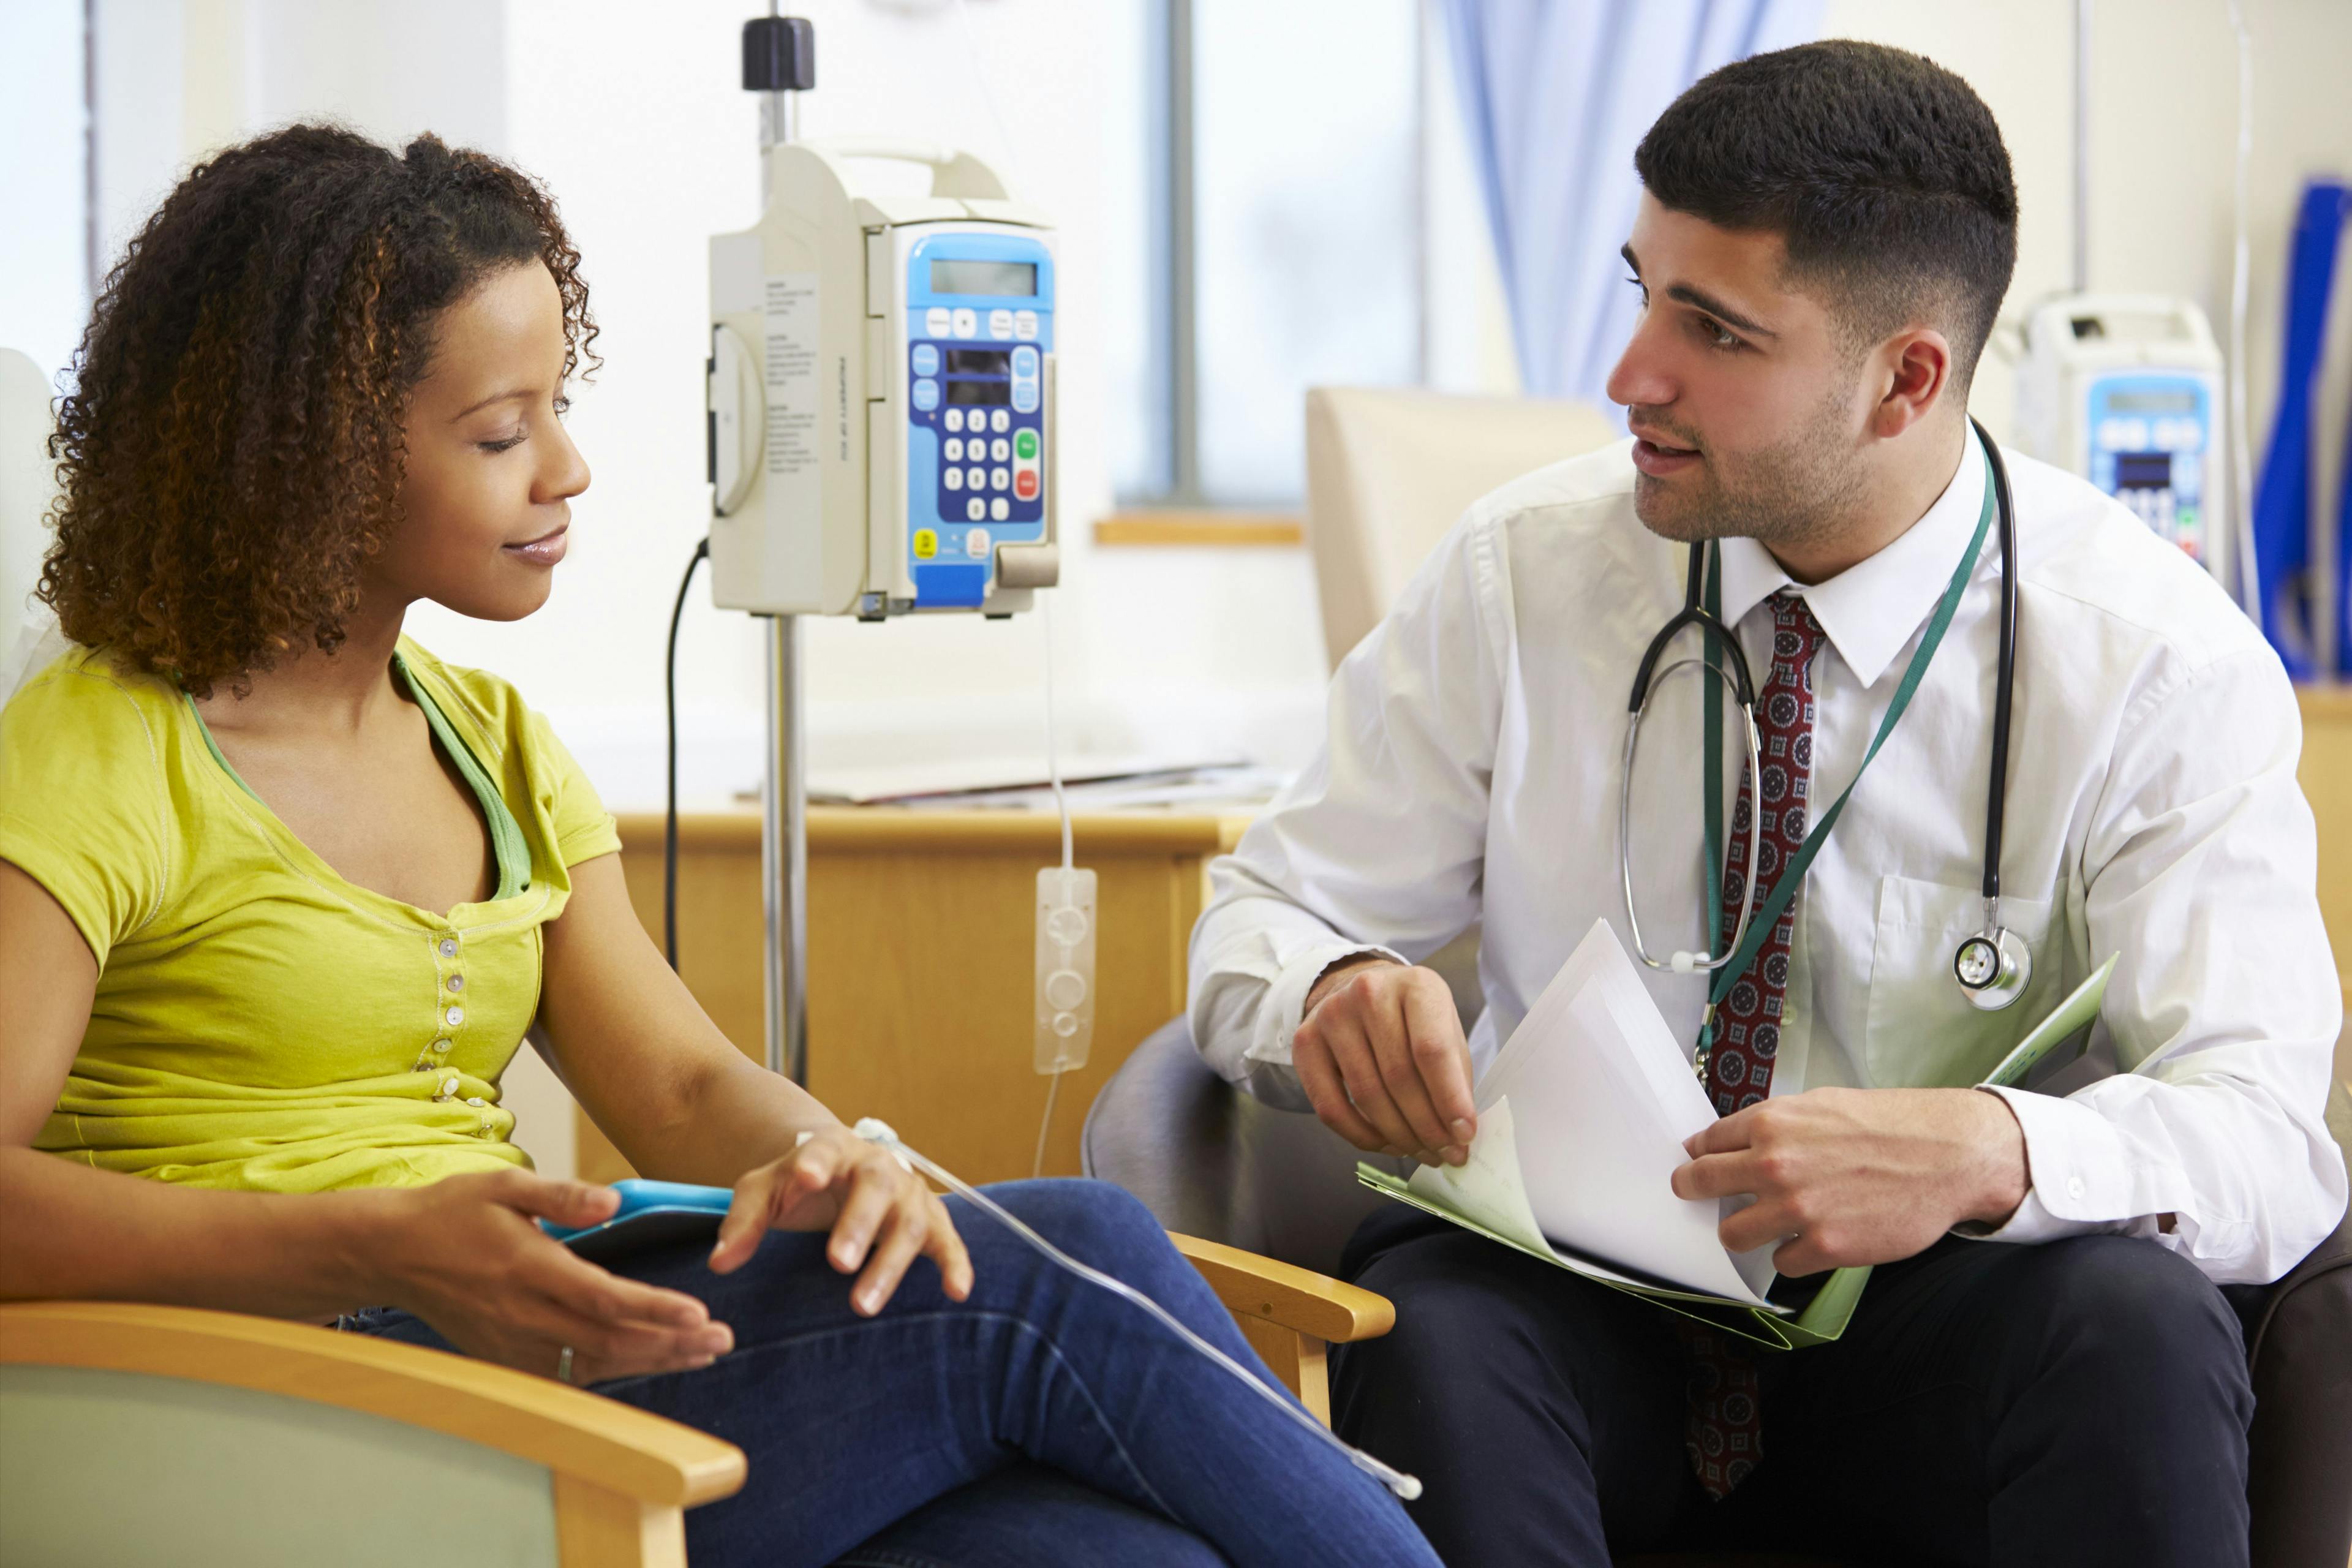 Study: Patients With Cancer Lack Access to LGBTQI+-Tailored Education Material